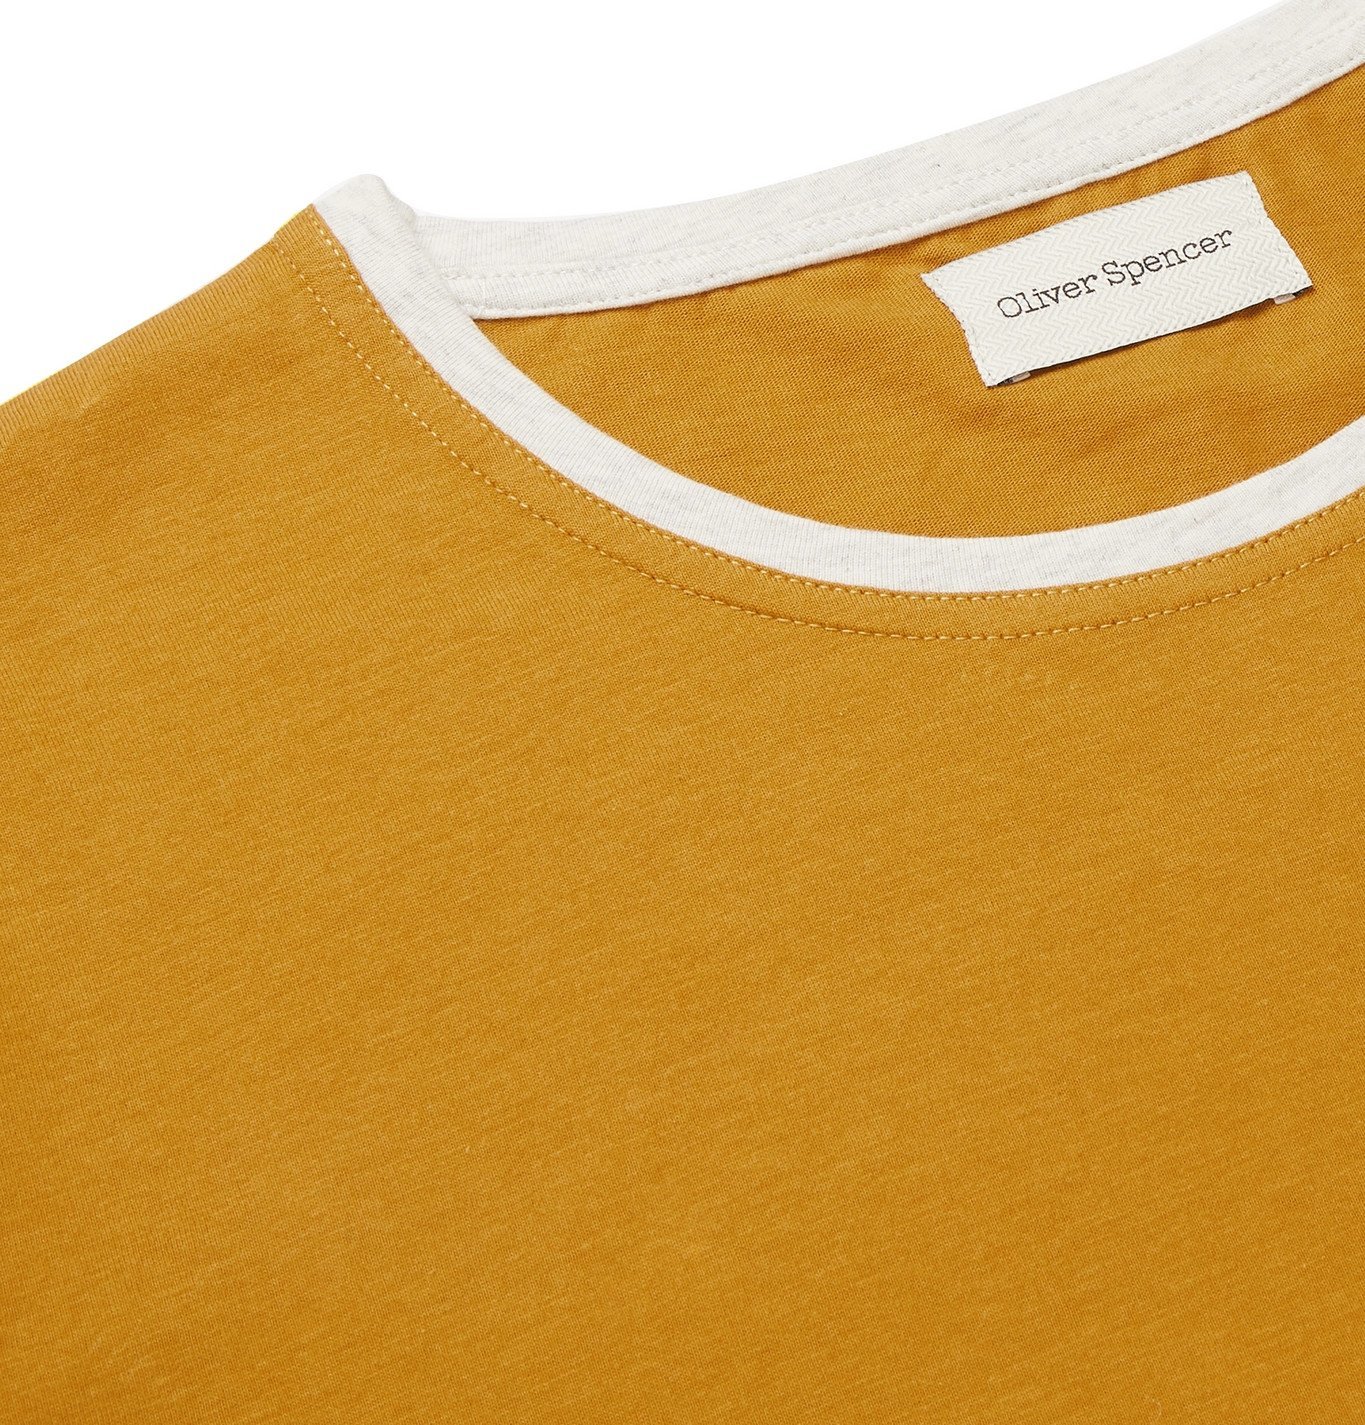 Oliver Spencer - Envelope Contrast-Tipped Cotton-Jersey T-Shirt - Yellow